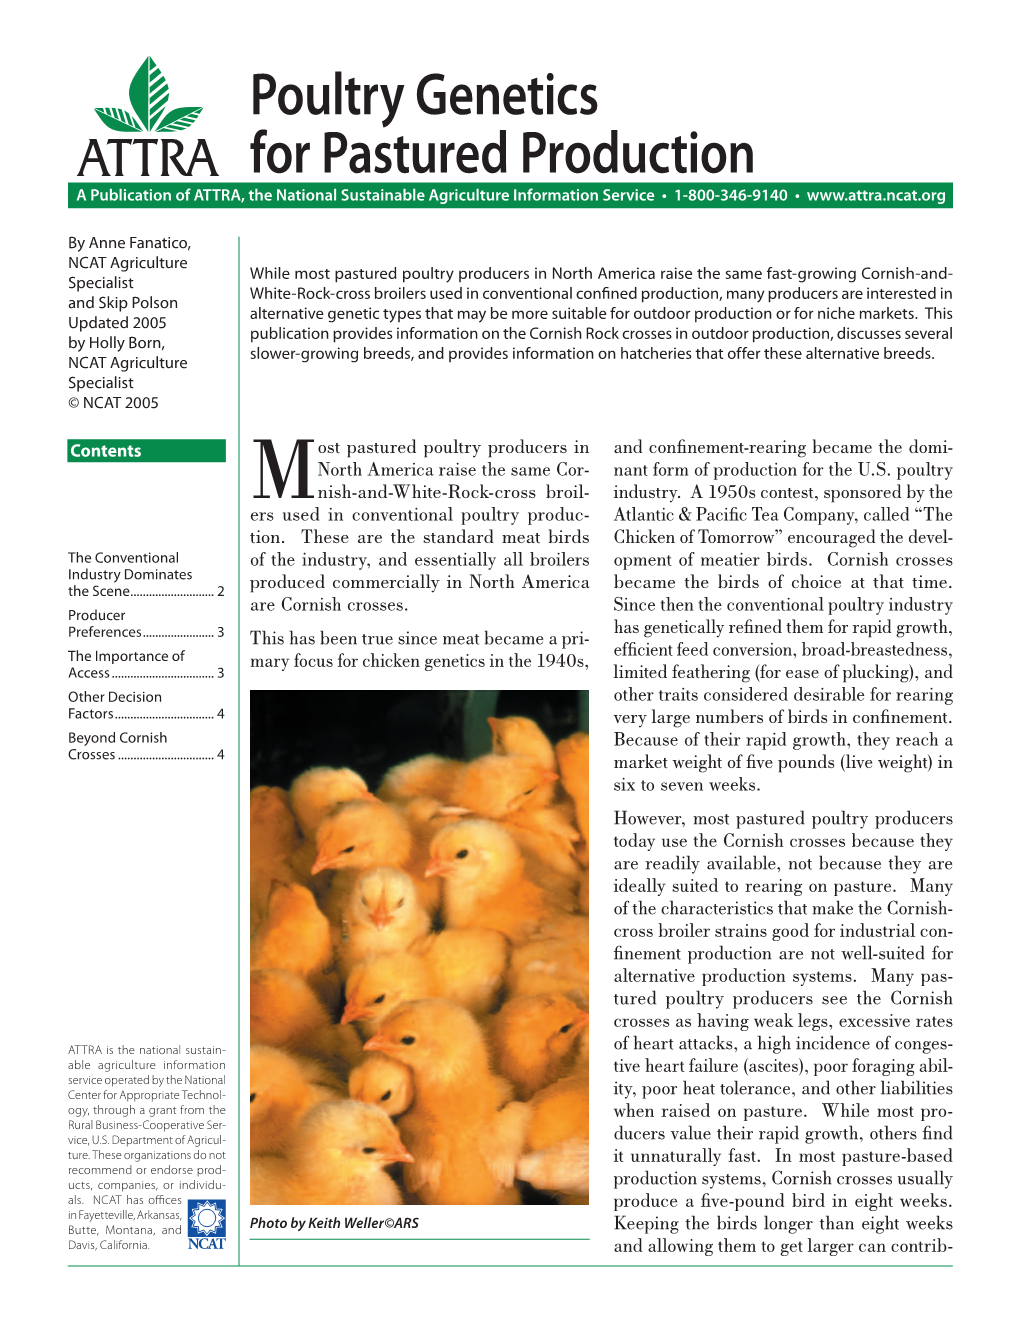 Poultry Genetics for Pastured Production